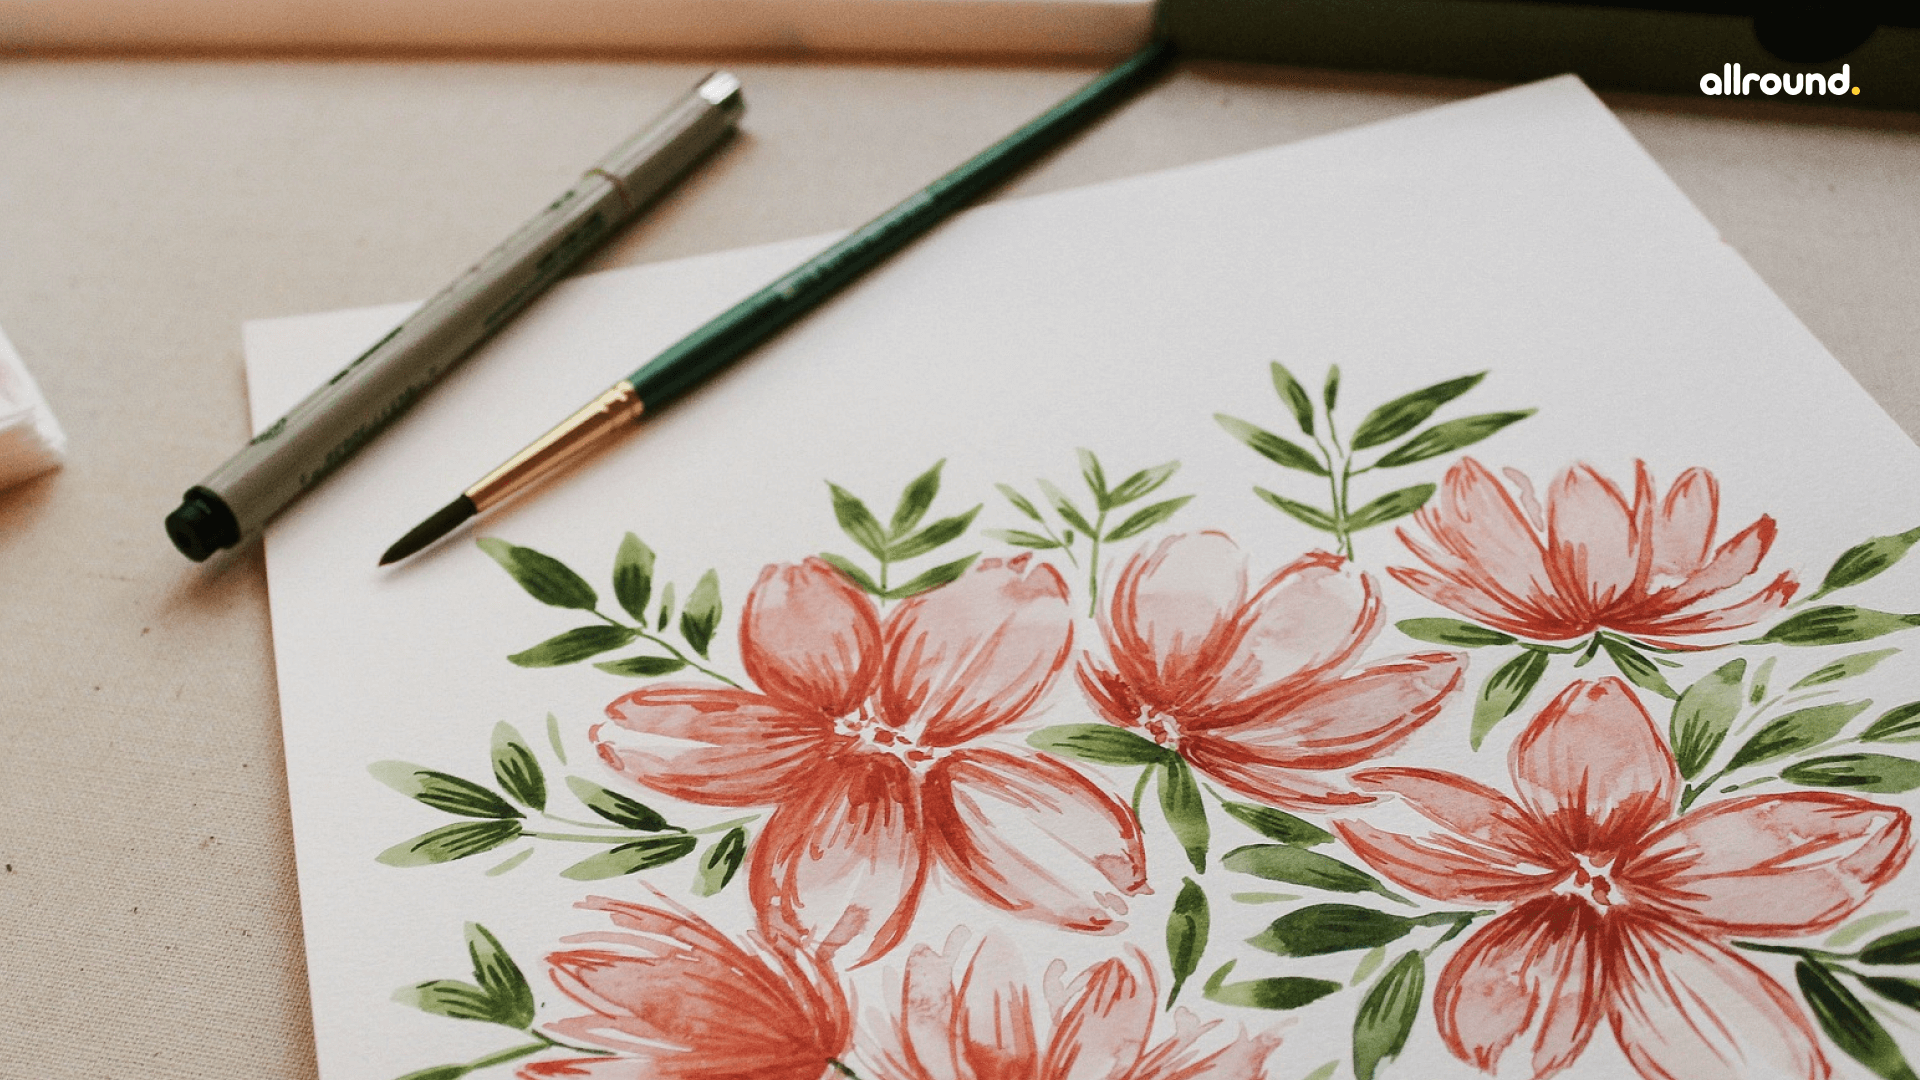 How to draw beautiful flowers? - Step by Step Drawing Guide for Kids